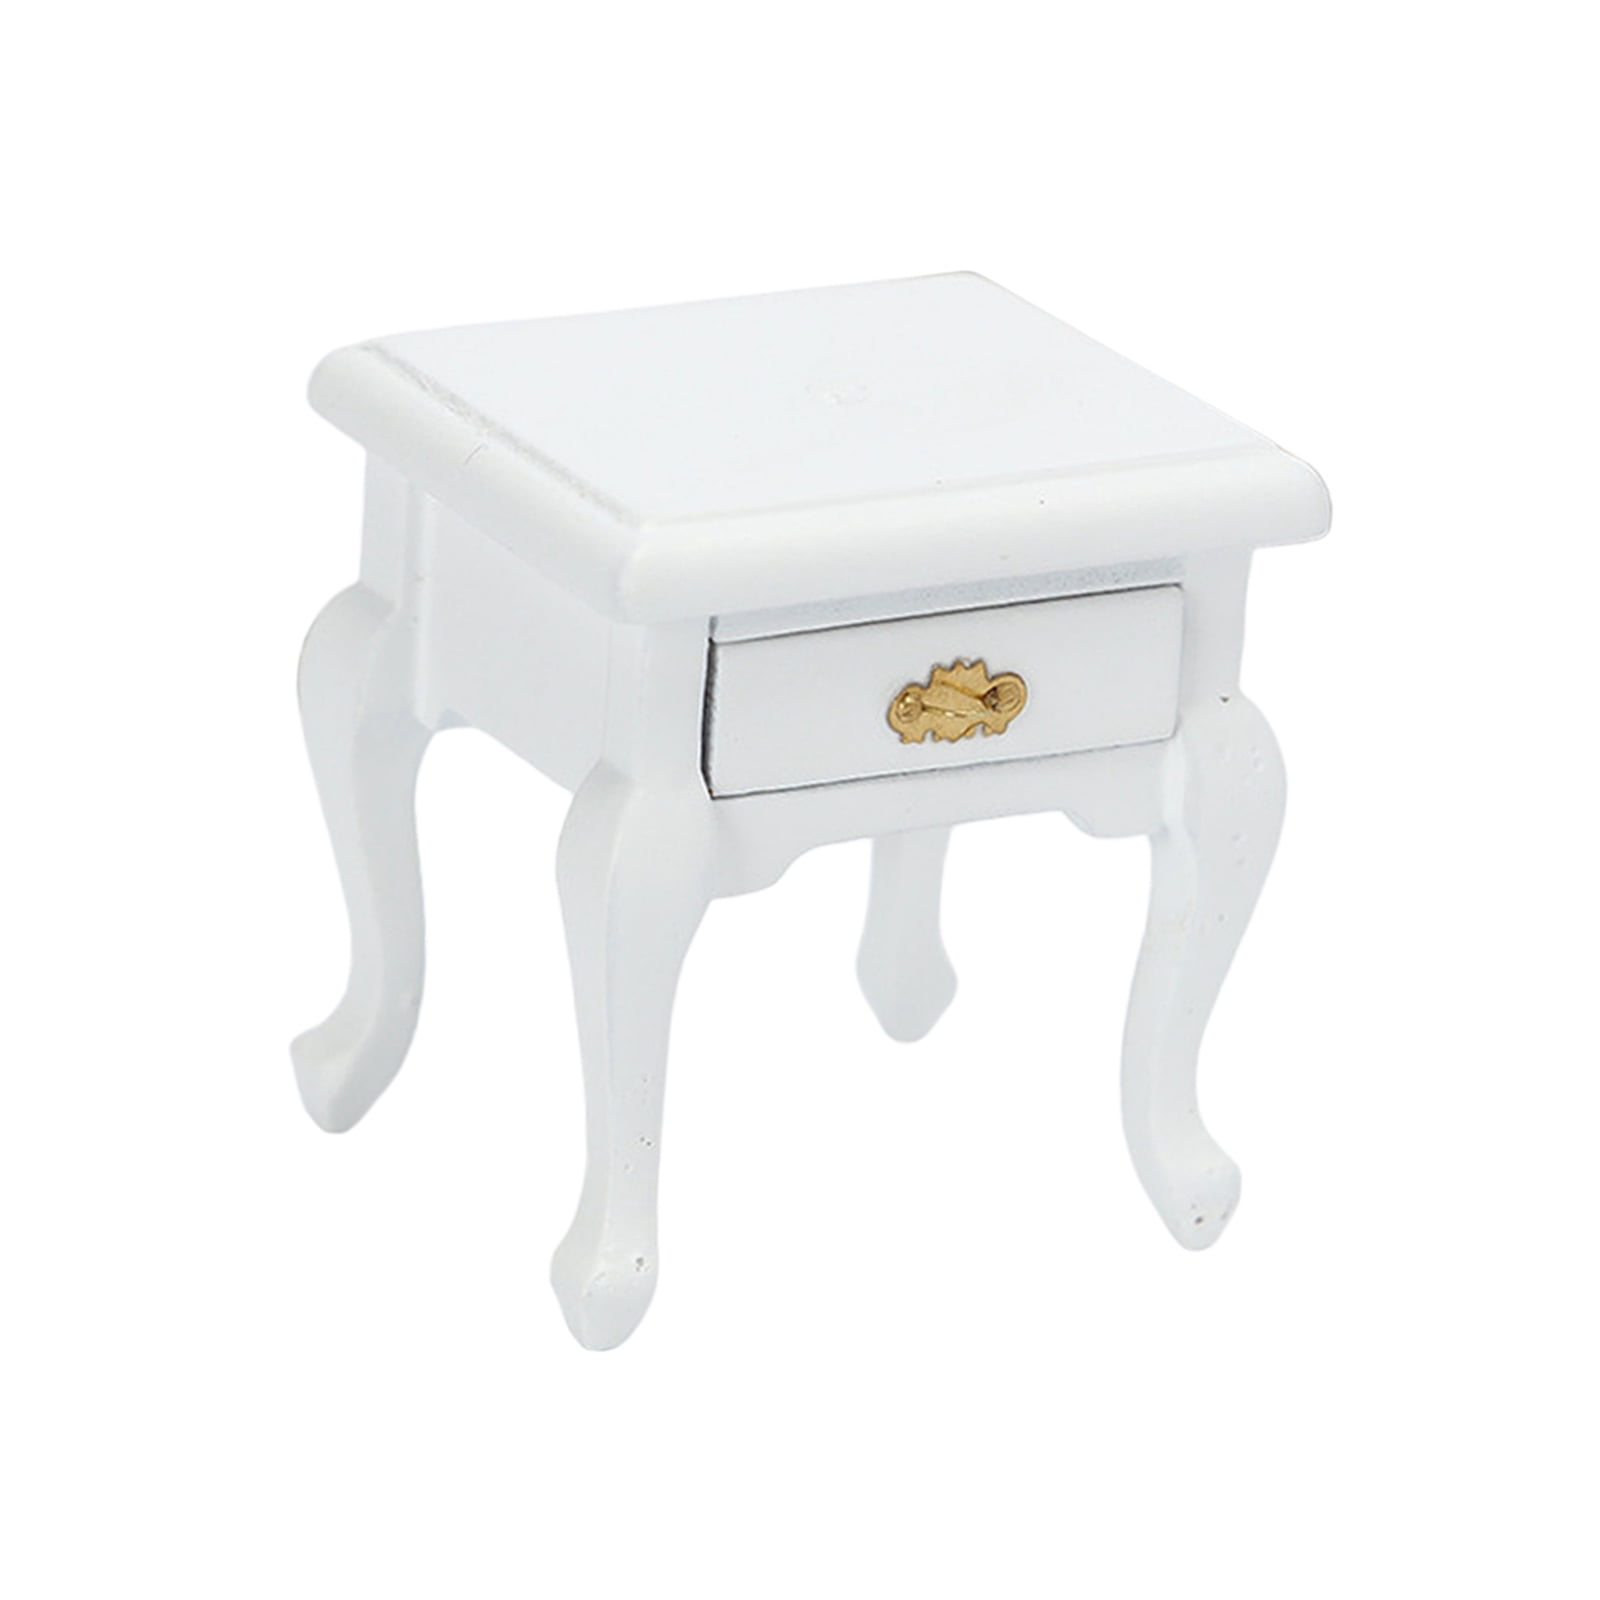 1:12 Dollhouse Bedroom Furniture White Wood Bedside Table Nightstand Cabinet 